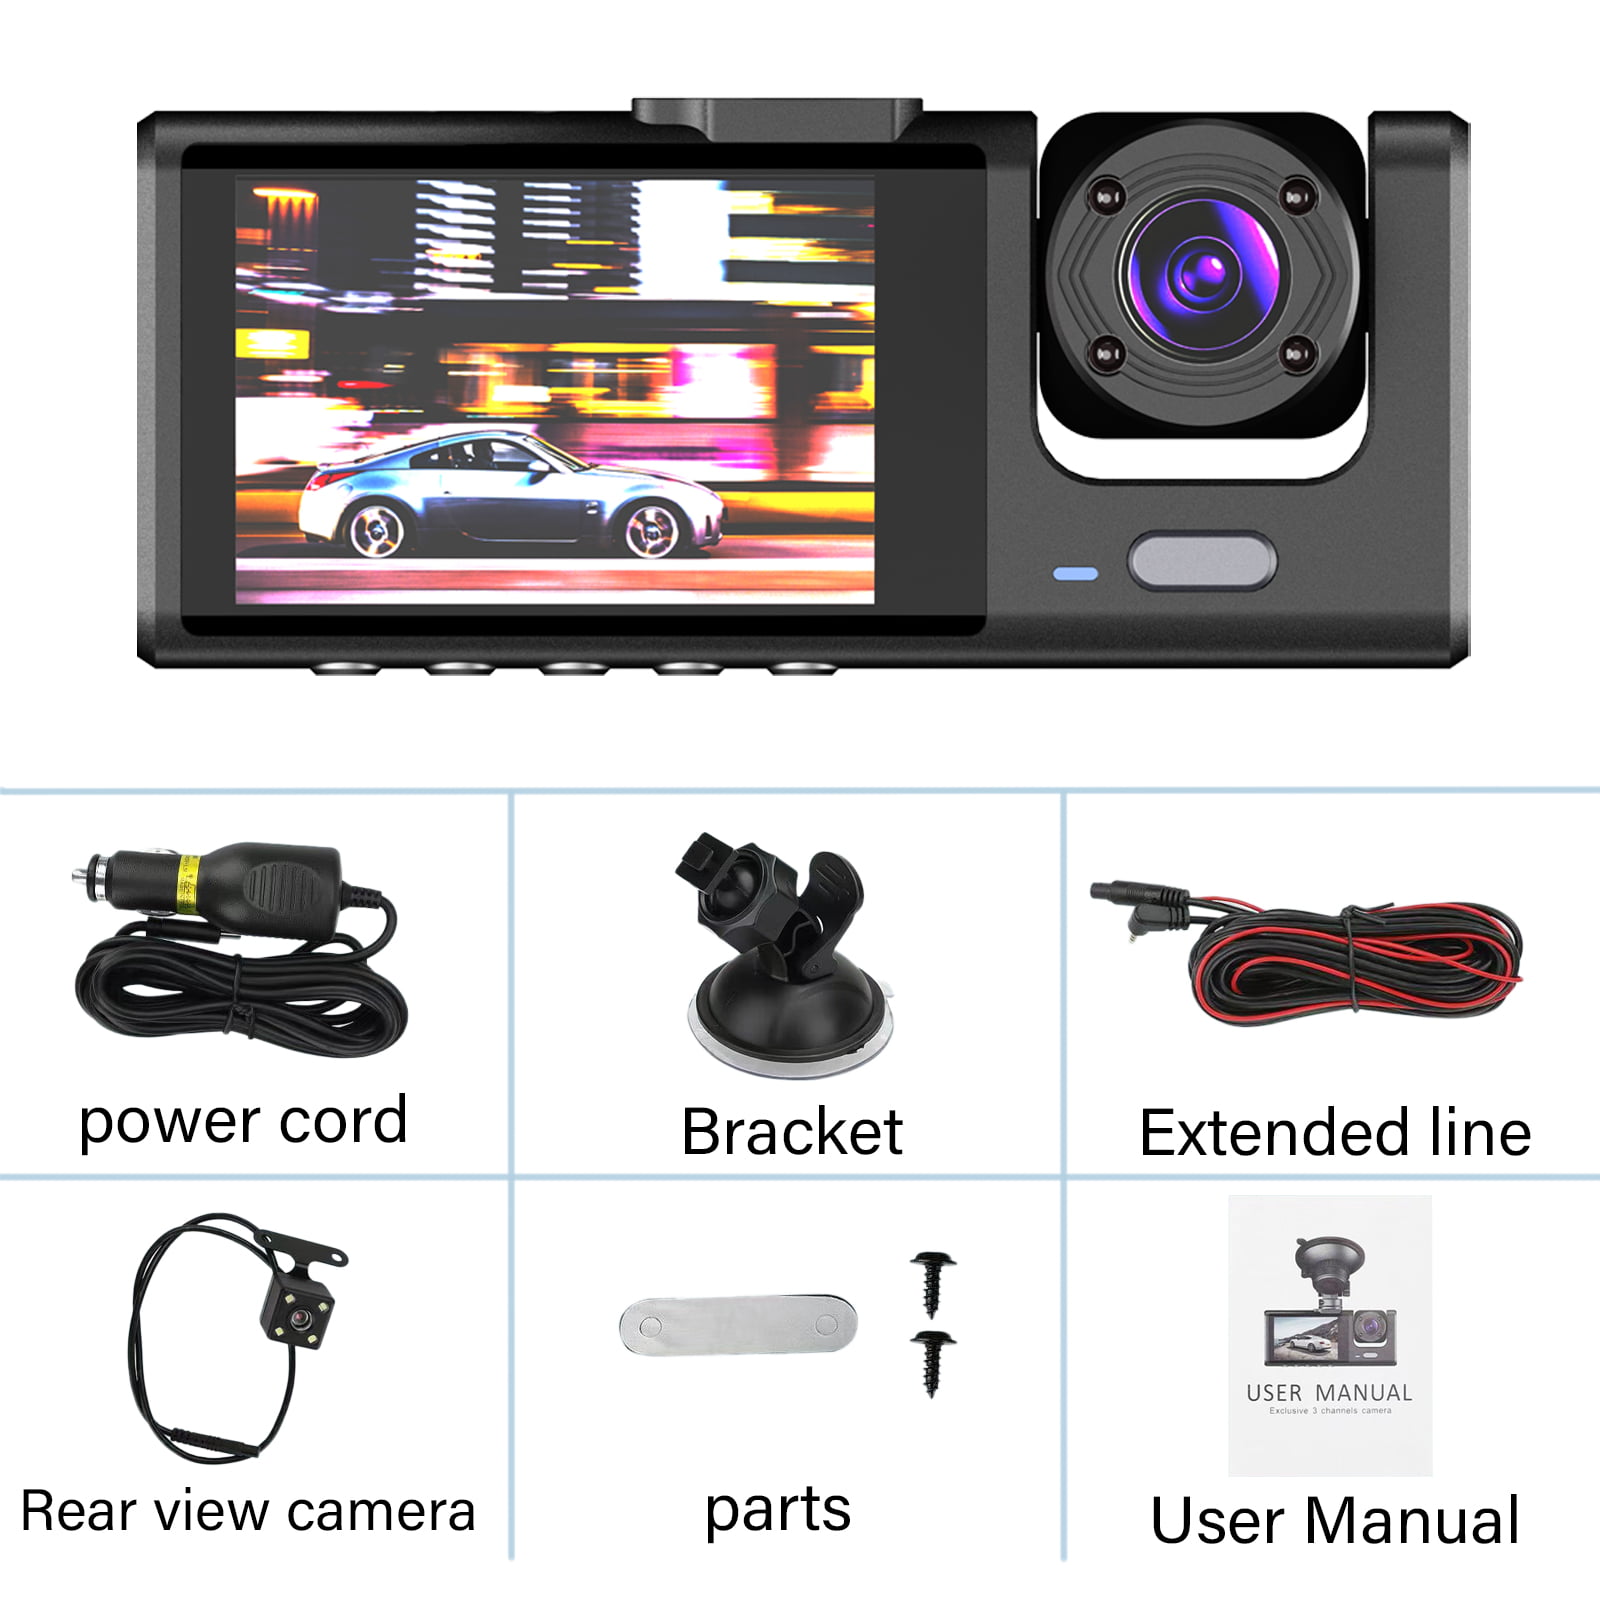 Dropship 3 Channel Dash Cam Front And Rear Inside; 1080P Dash IR